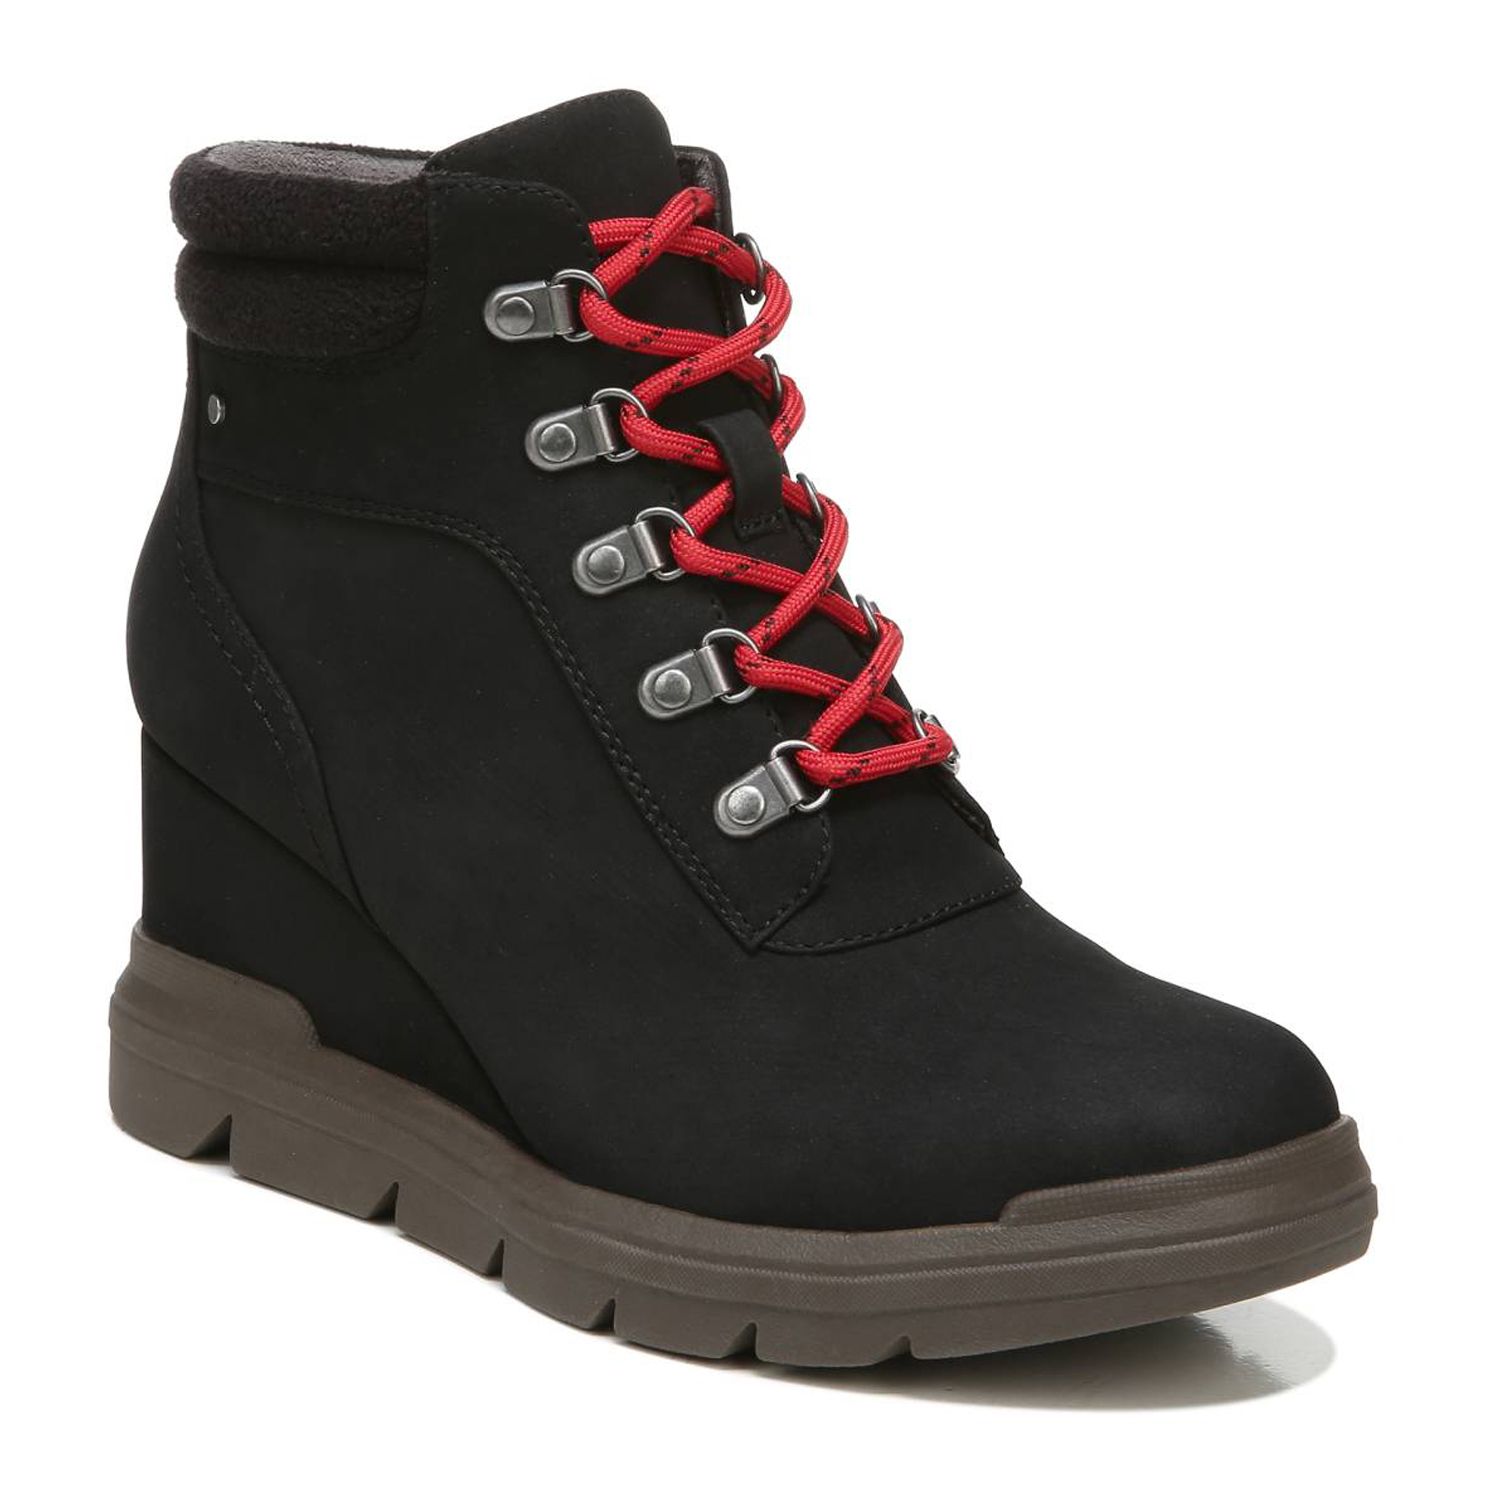 Image for Dr. Scholl's Reign Women's Wedge Boots at Kohl's.